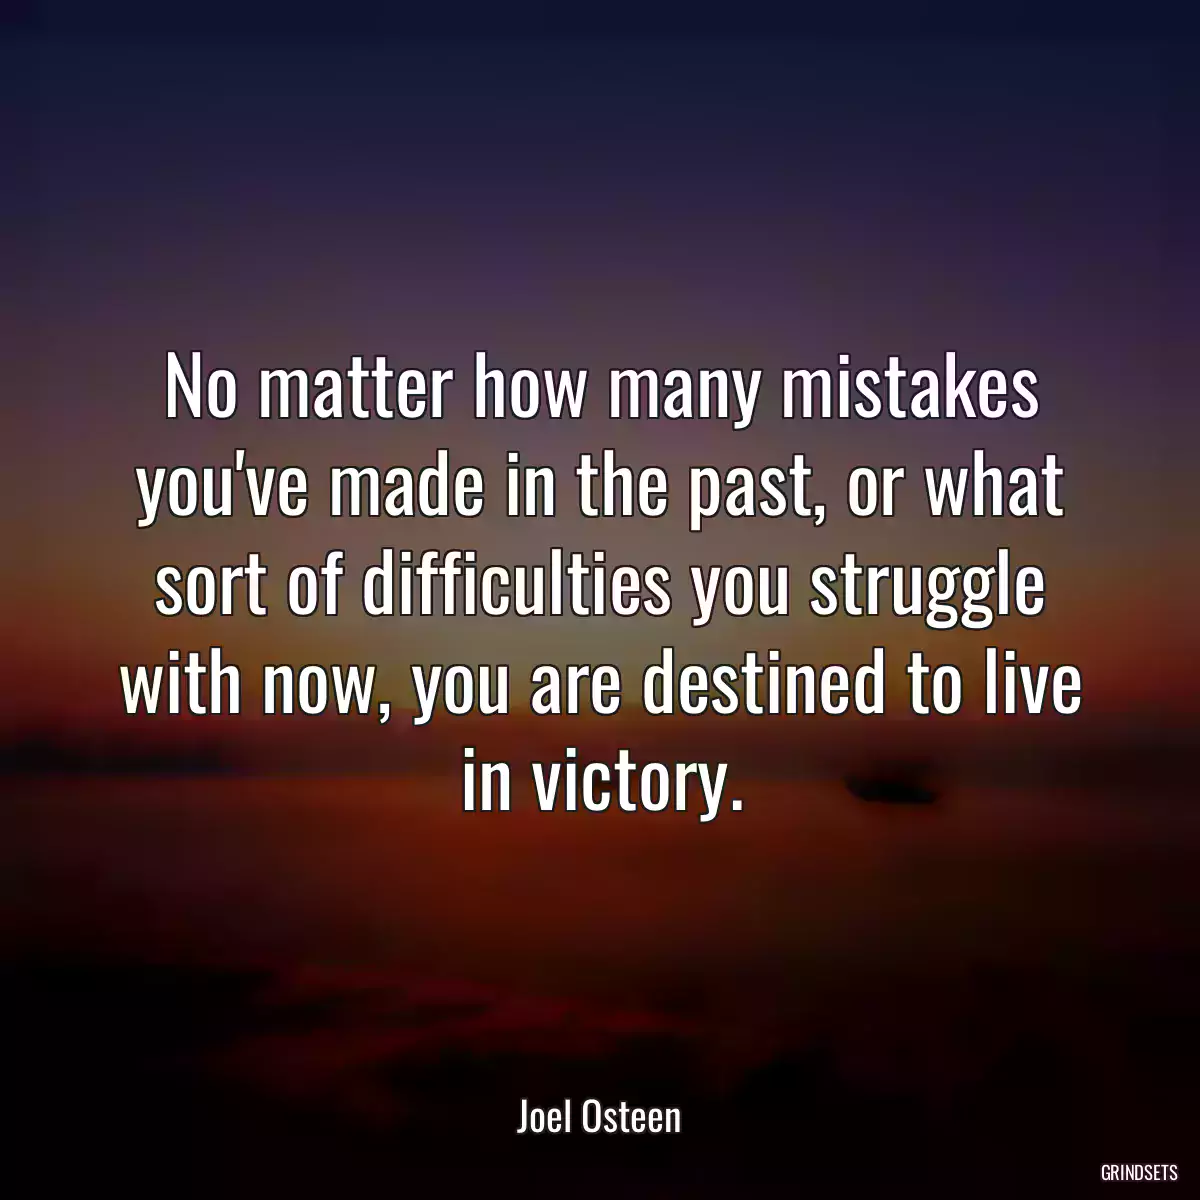 No matter how many mistakes you\'ve made in the past, or what sort of difficulties you struggle with now, you are destined to live in victory.